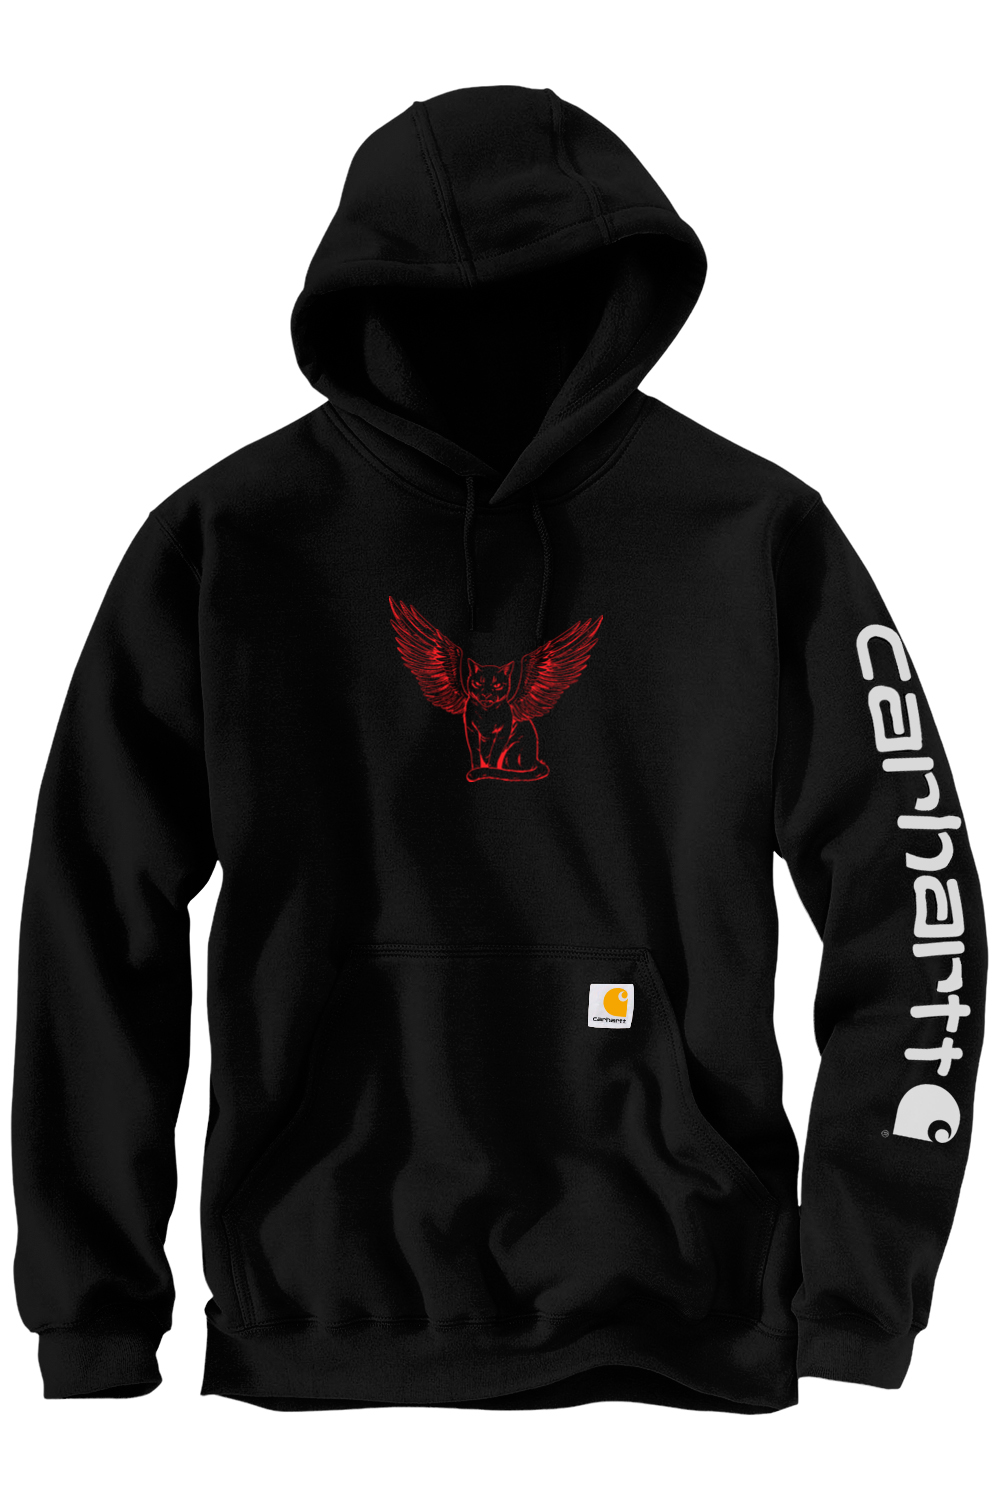 "The Cat" - Carhartt Midweight Wings Hoodie (runs large)